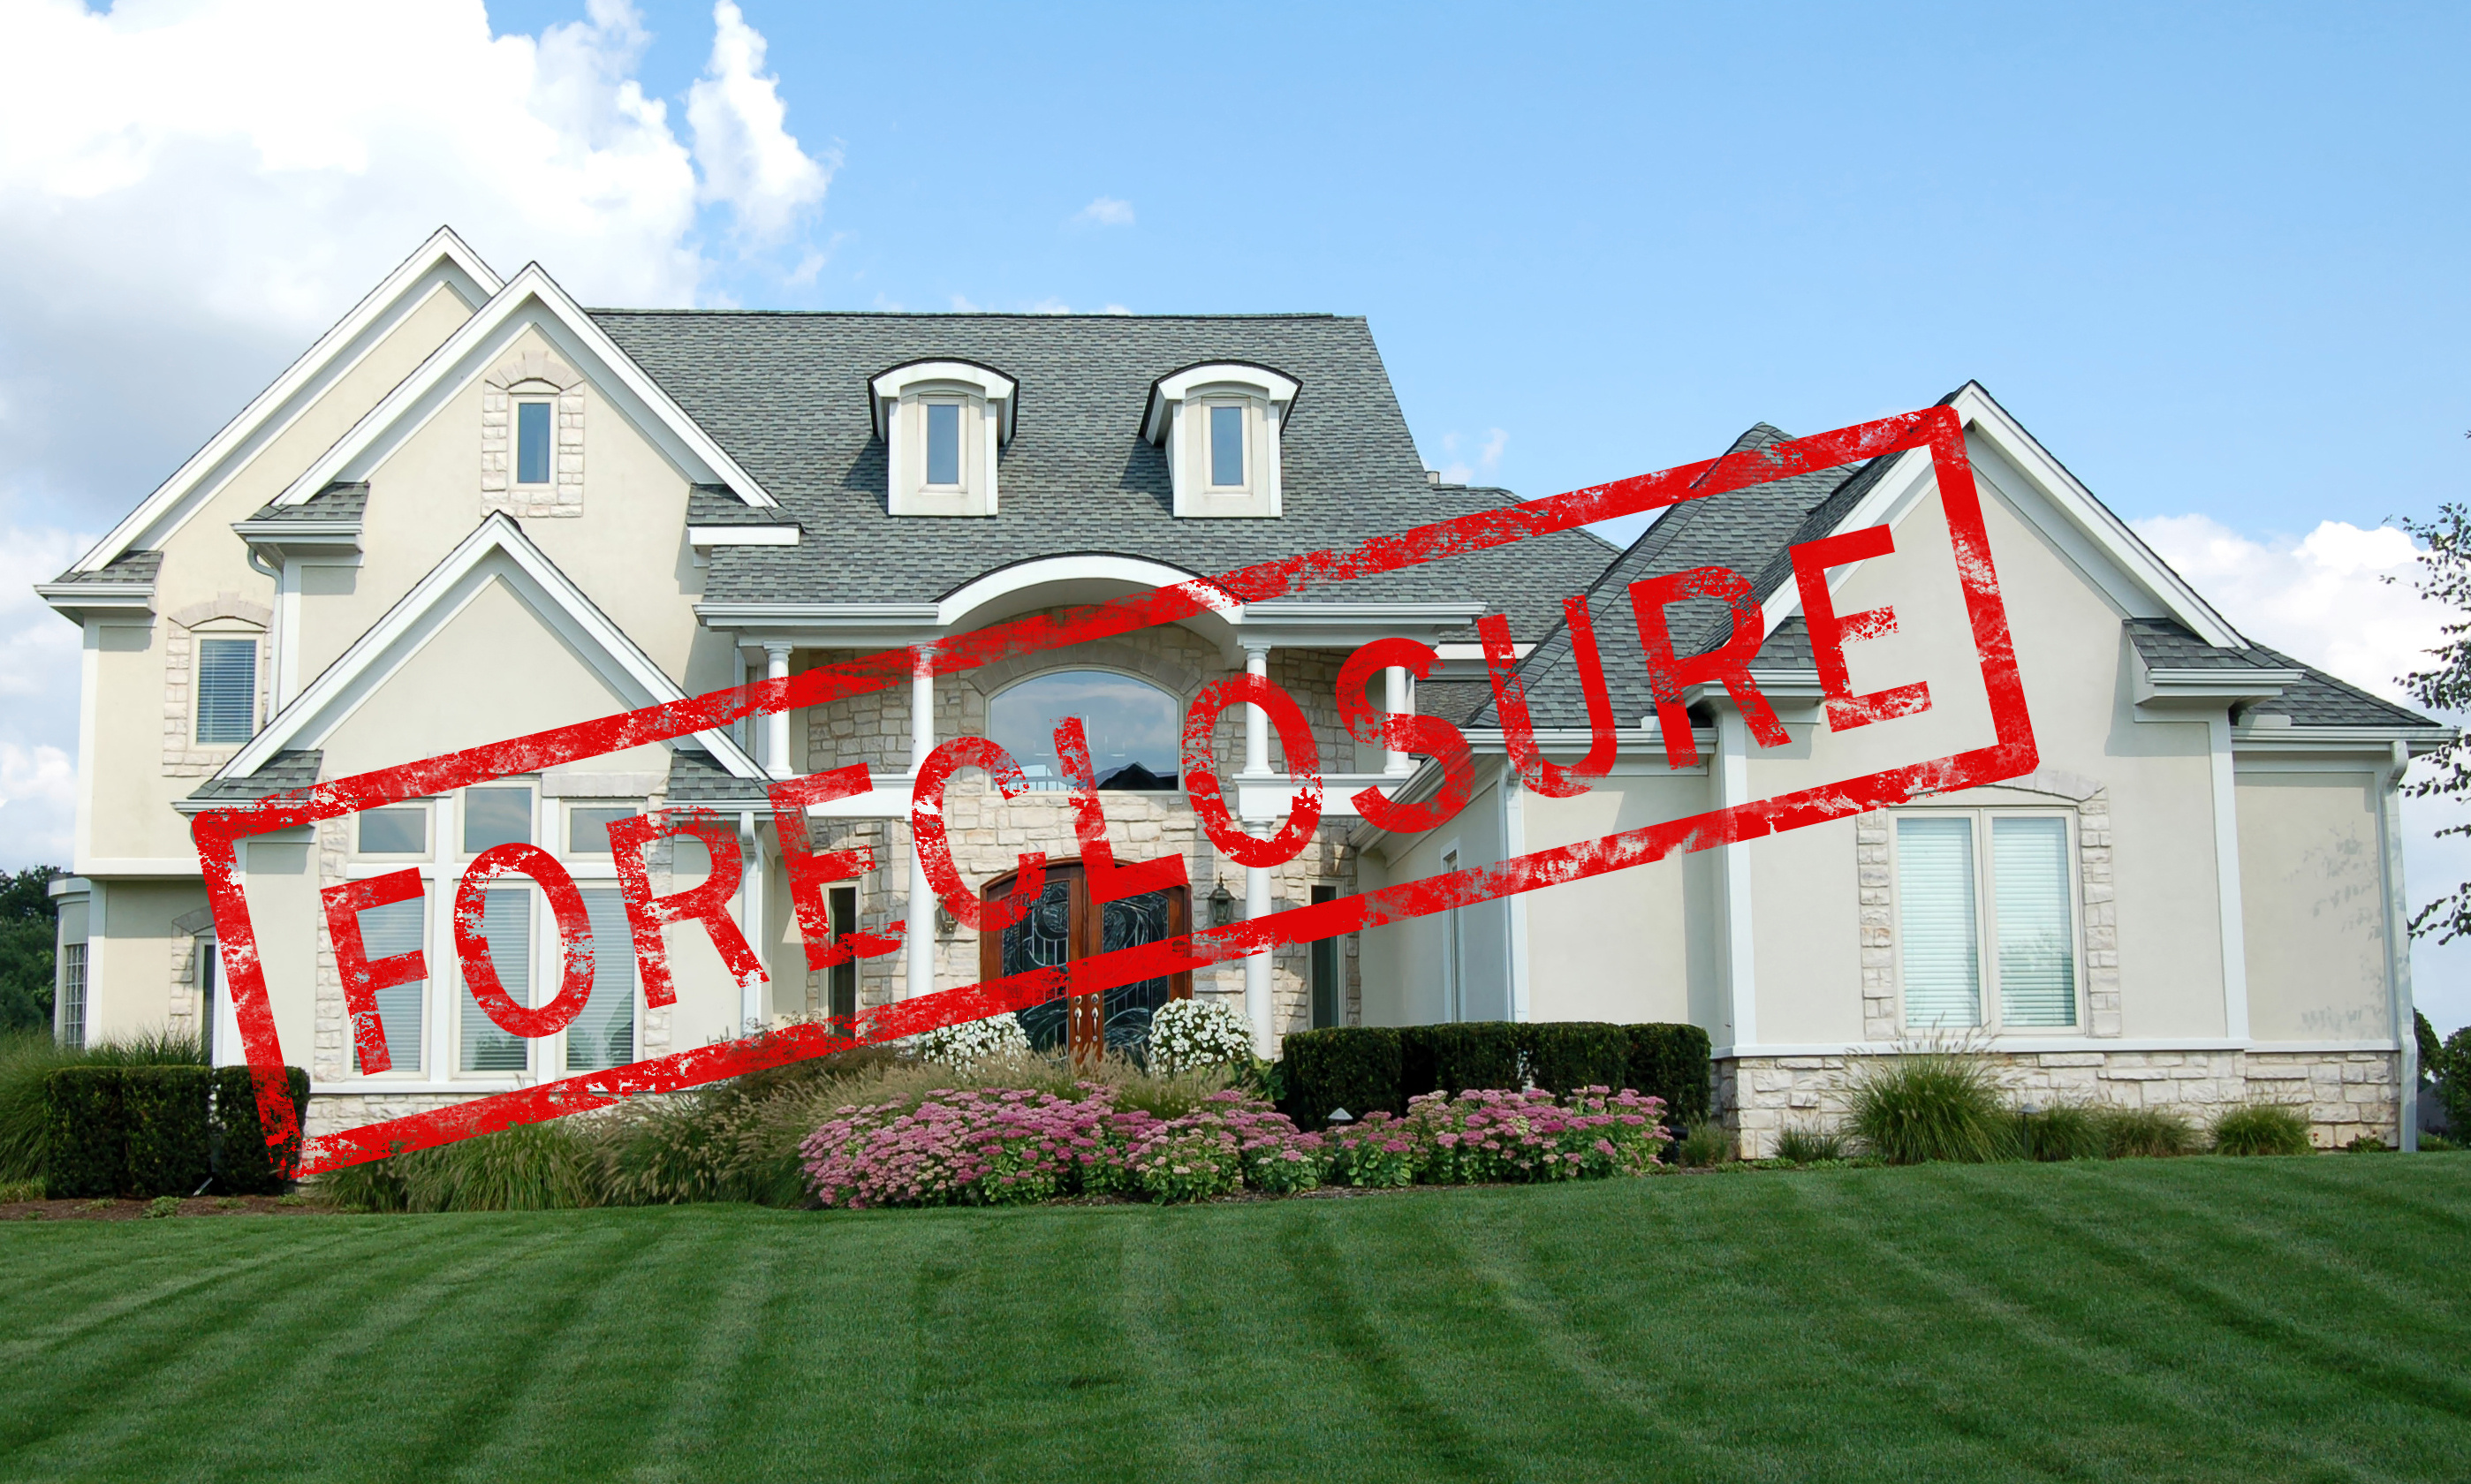 Call JTLH Real Estate Consultants, Inc. to discuss valuations of Henry foreclosures